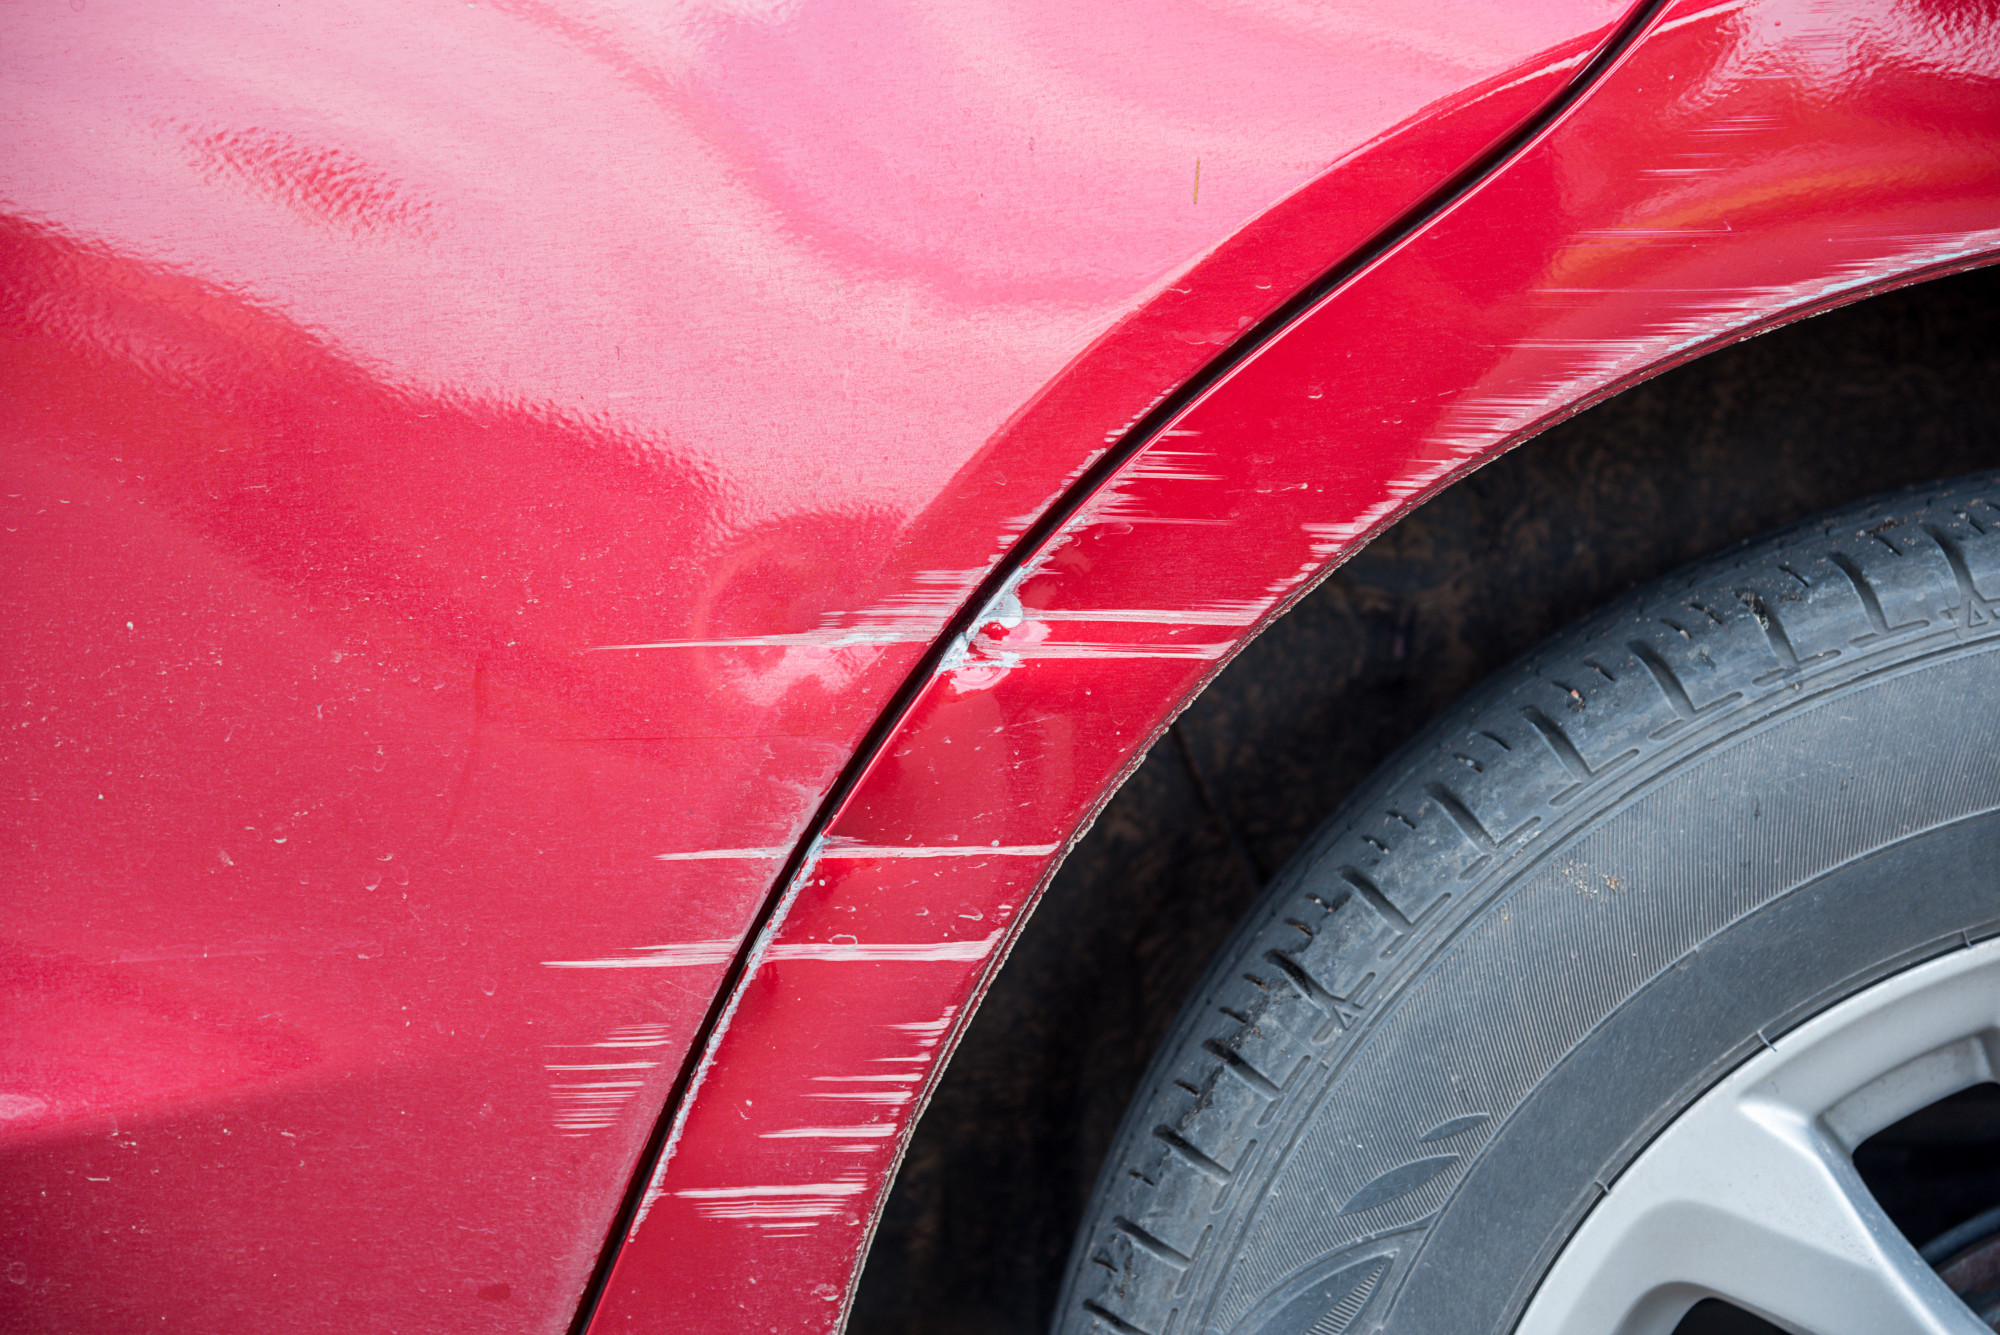 How Much Is That Scratch on My Car Really Costing Me? - Limerick Auto Body